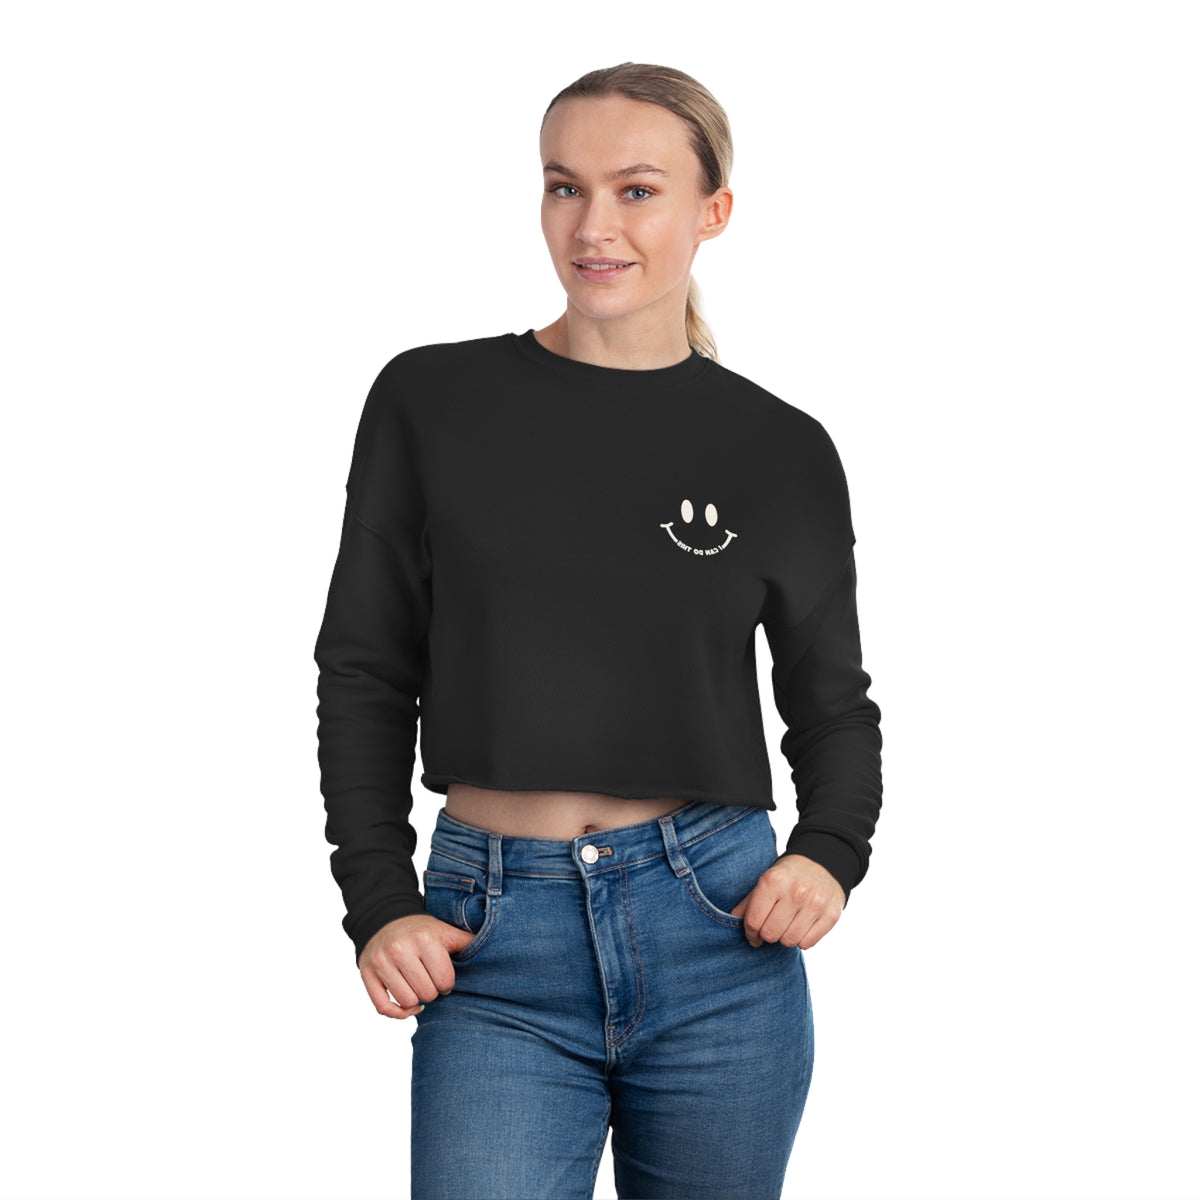 I Can Do This Cropped Sweatshirts